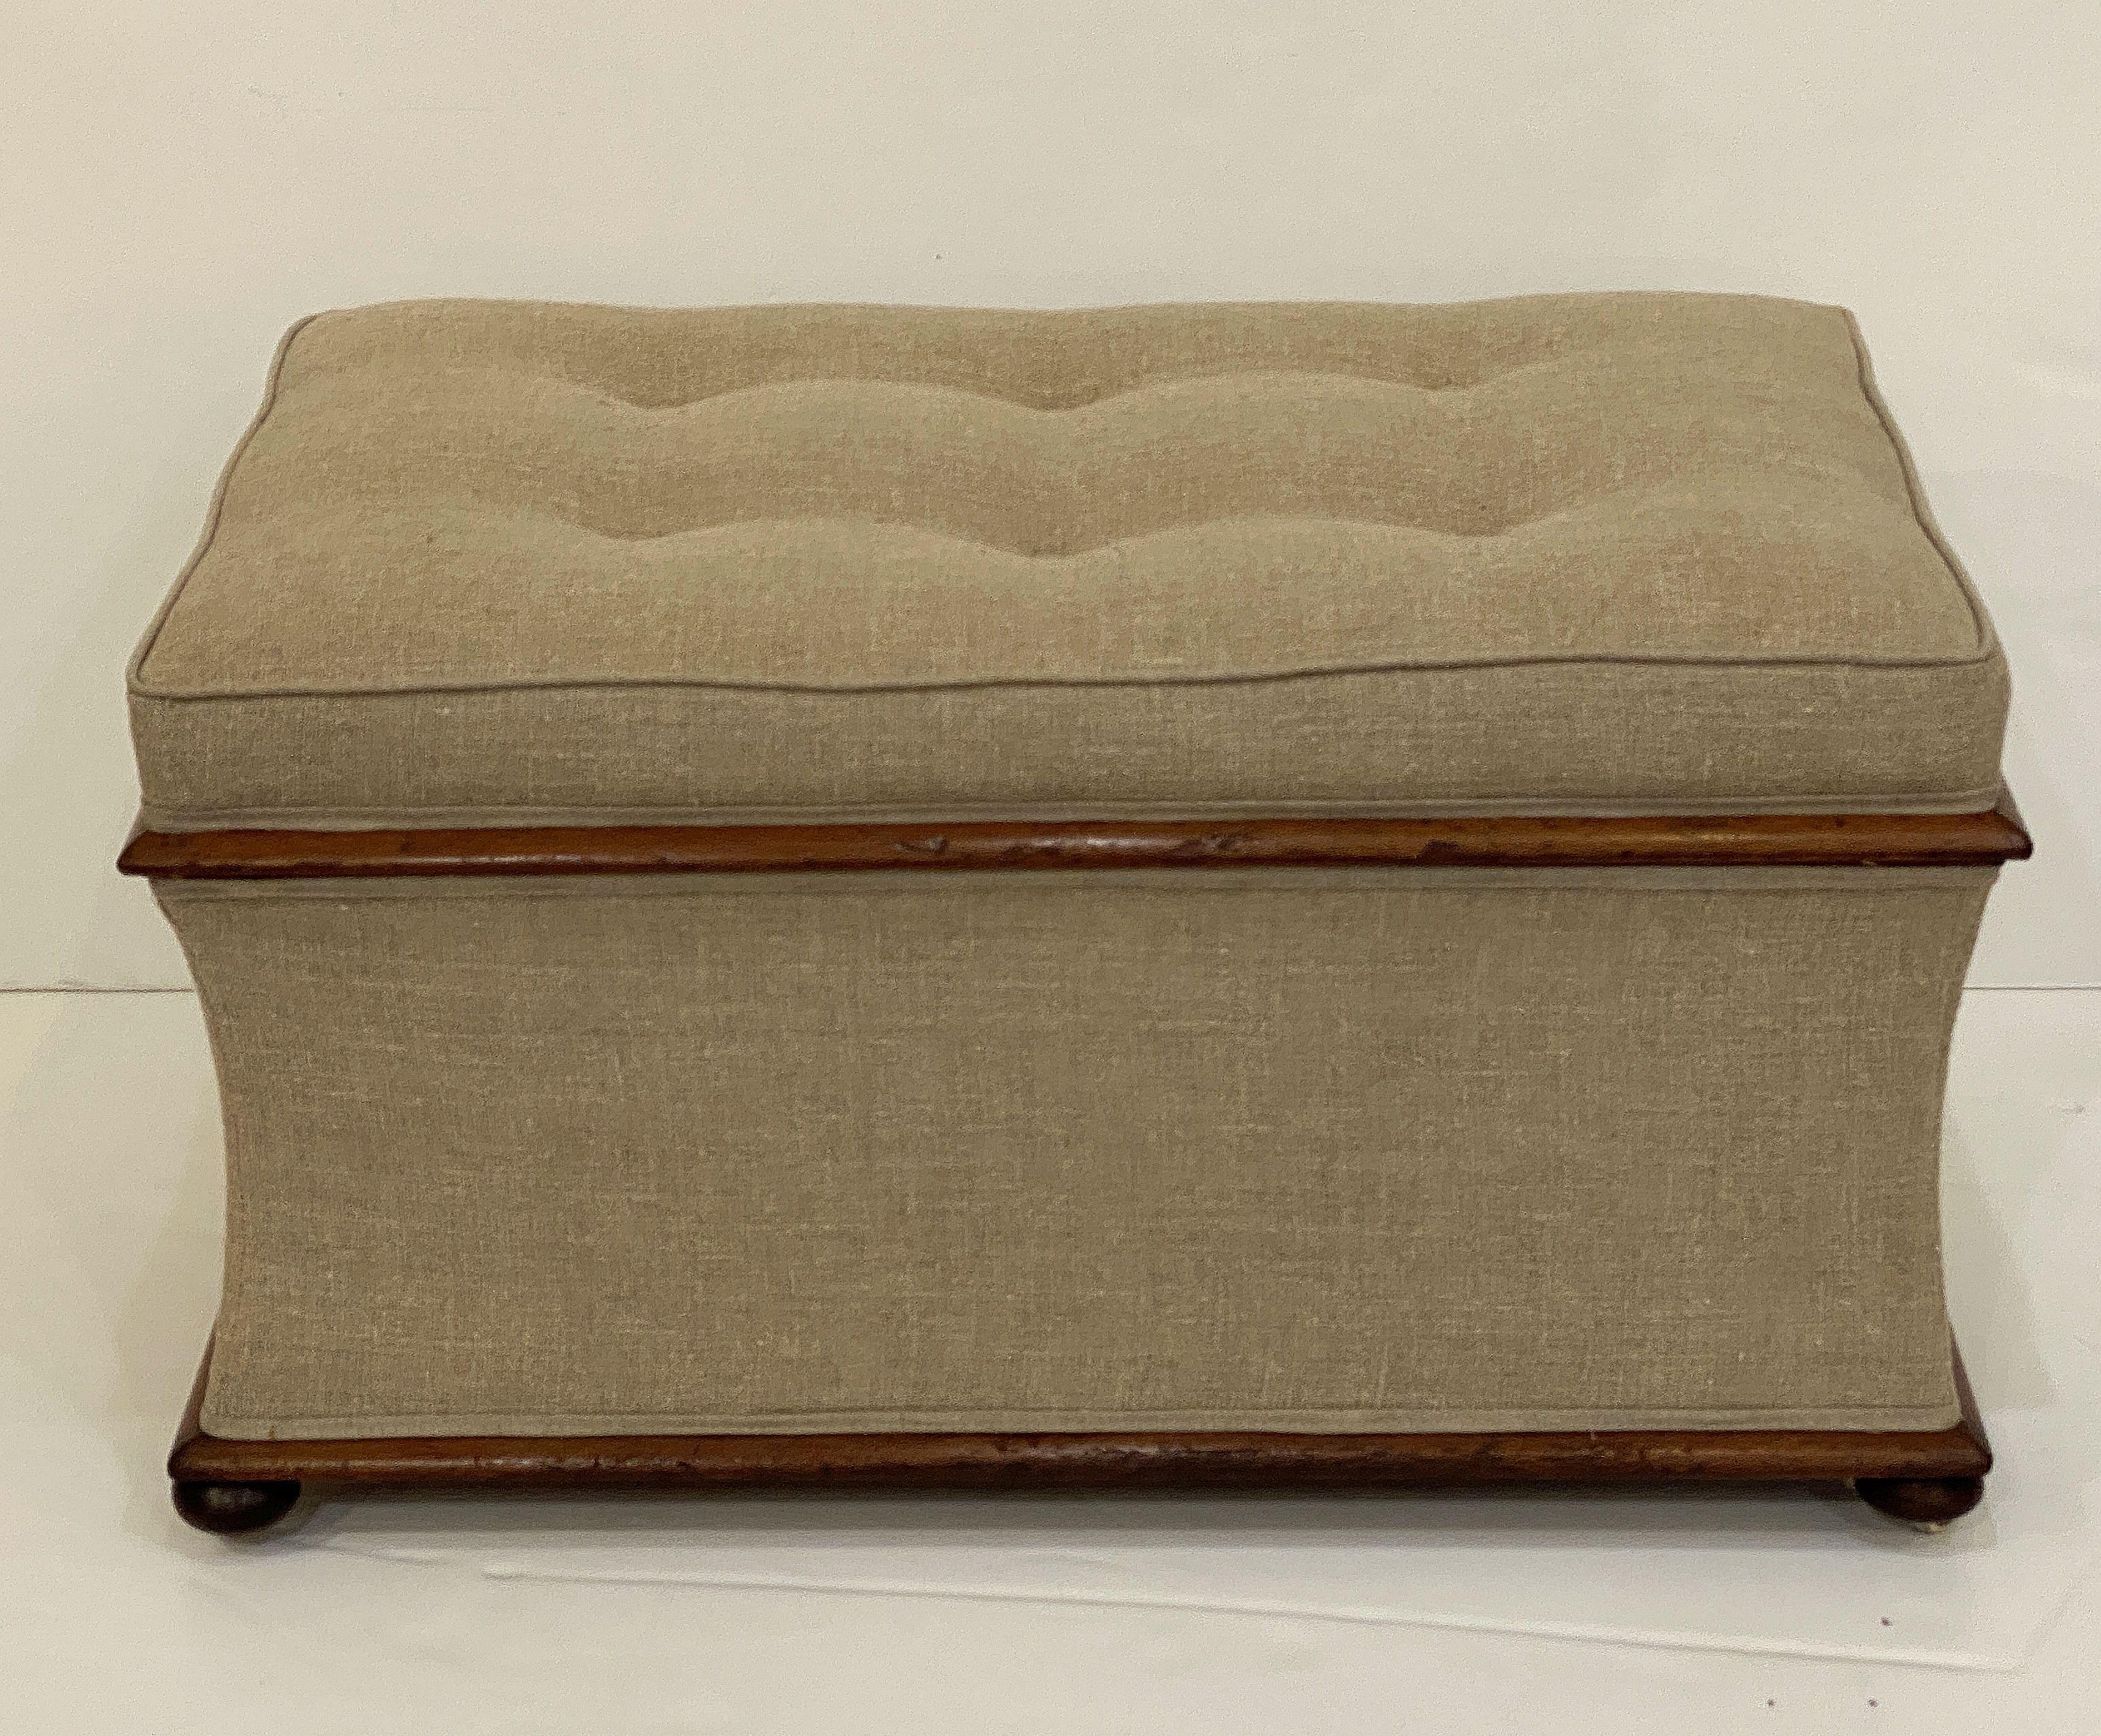 A handsome, comfortable English rectangular upholstered trunk or pouffe ottoman, featuring an upholstered seat with hinged, tufted lid that lifts for storage, framed with accents of mahogany around the top and base, and resting on bun feet with